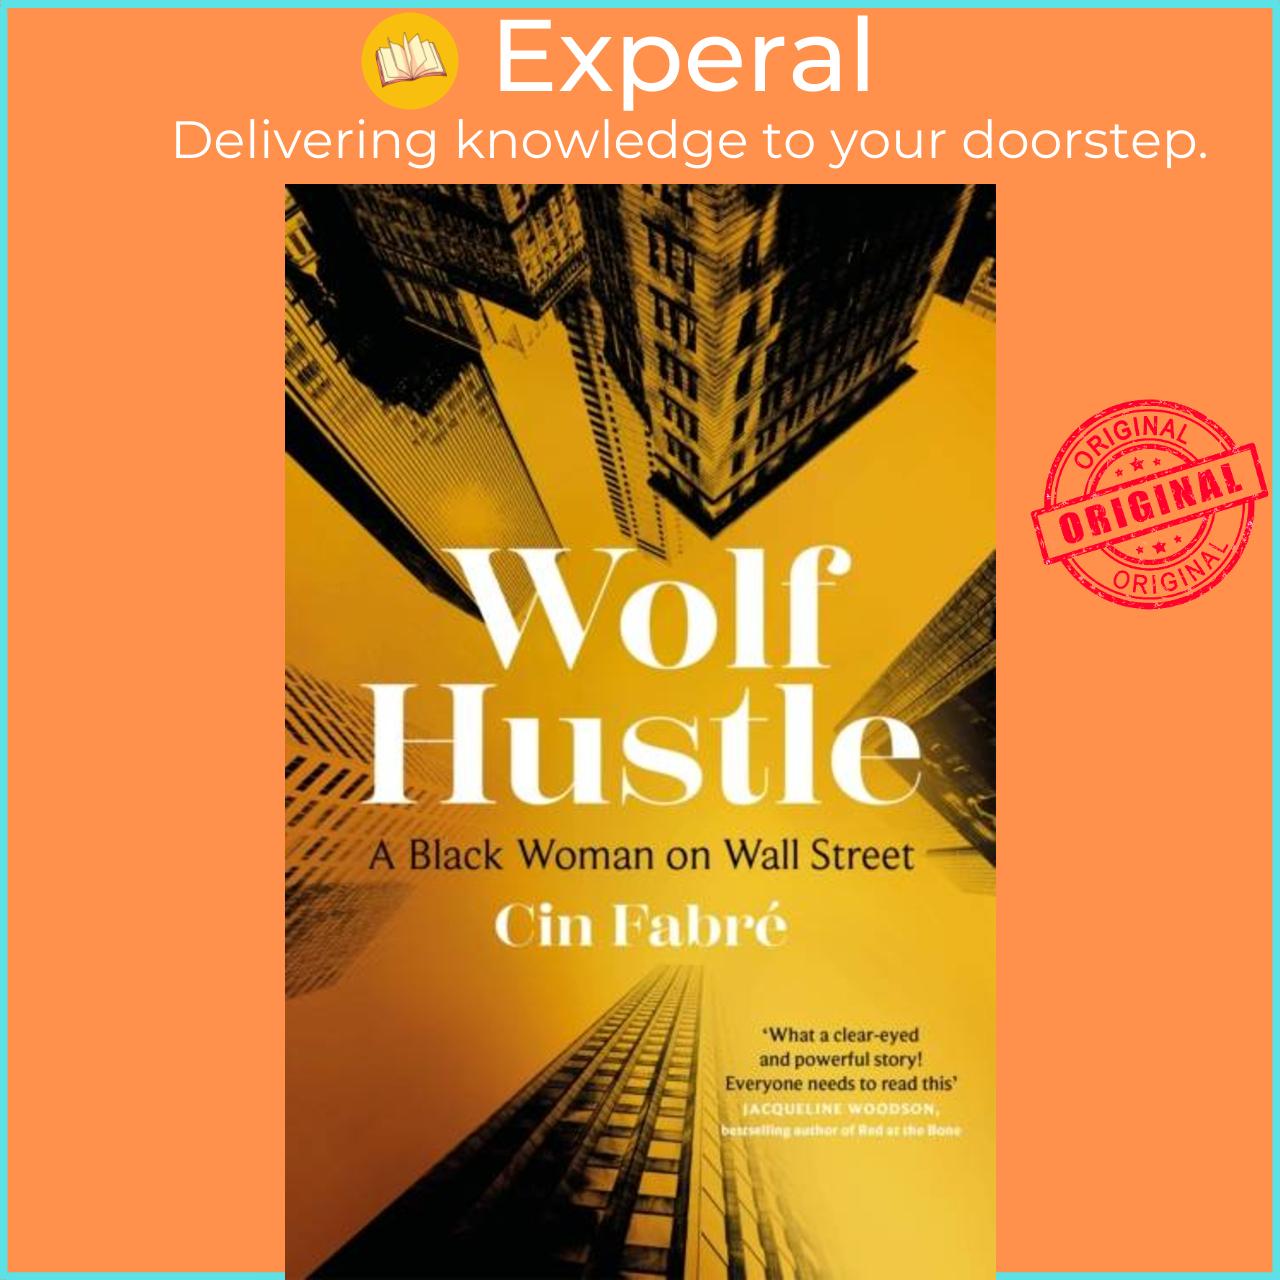 Sách - Wolf Hustle - A Black Woman on Wall Street by Cin Fabre (UK edition, hardcover)